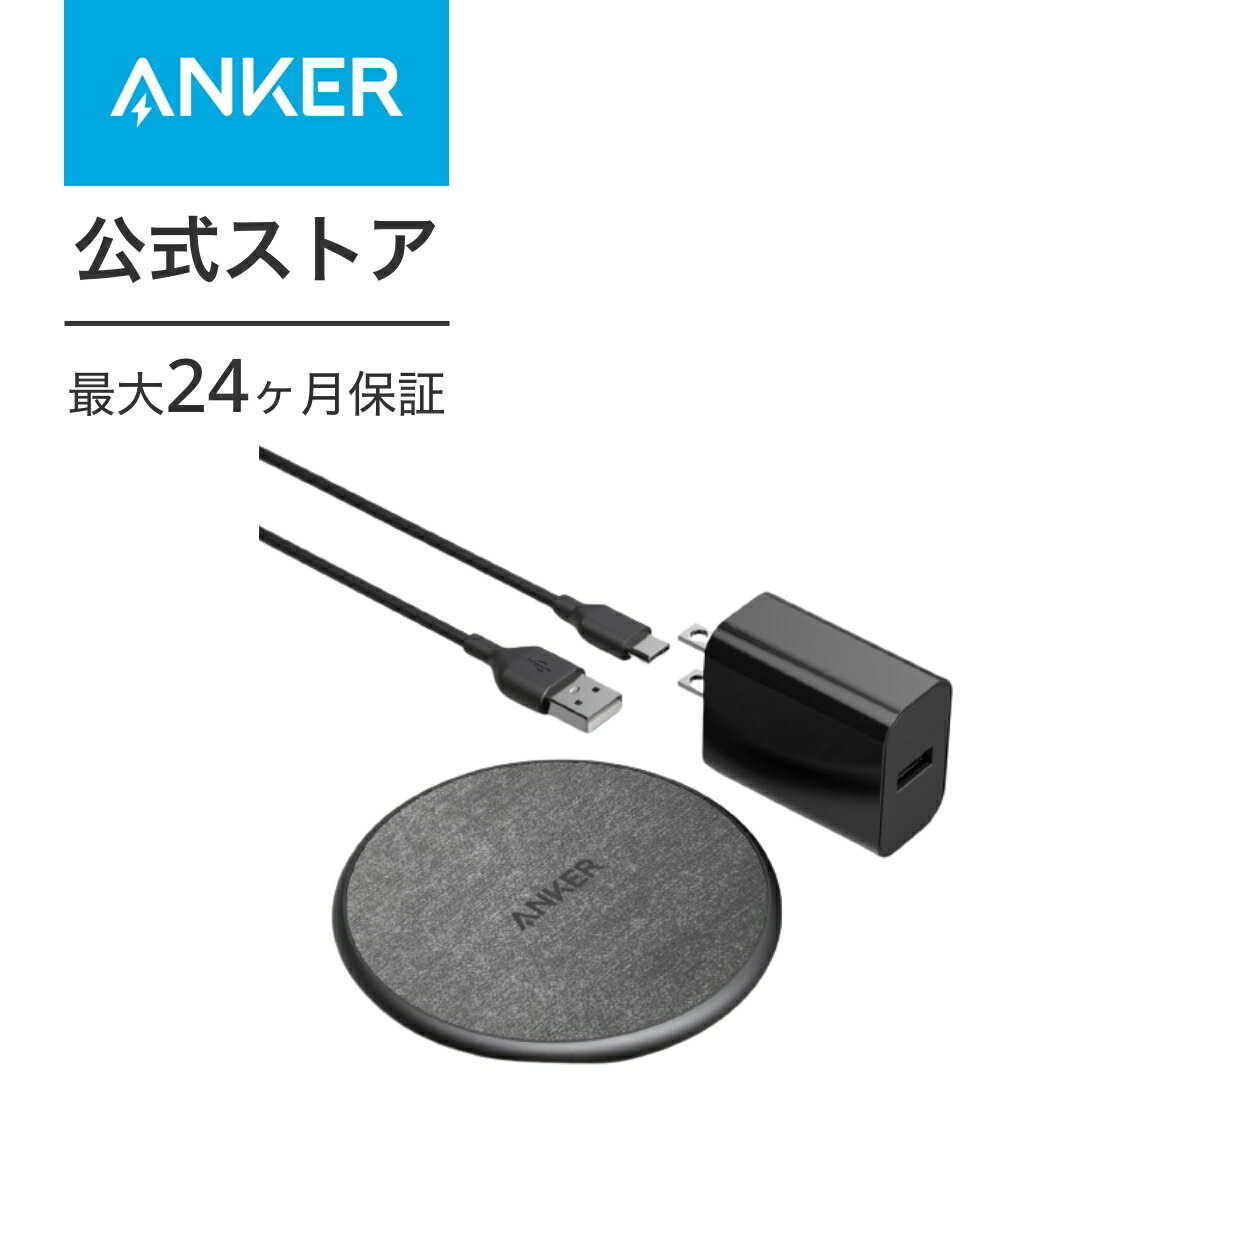 Anker 318 Wireless Charger (Pa